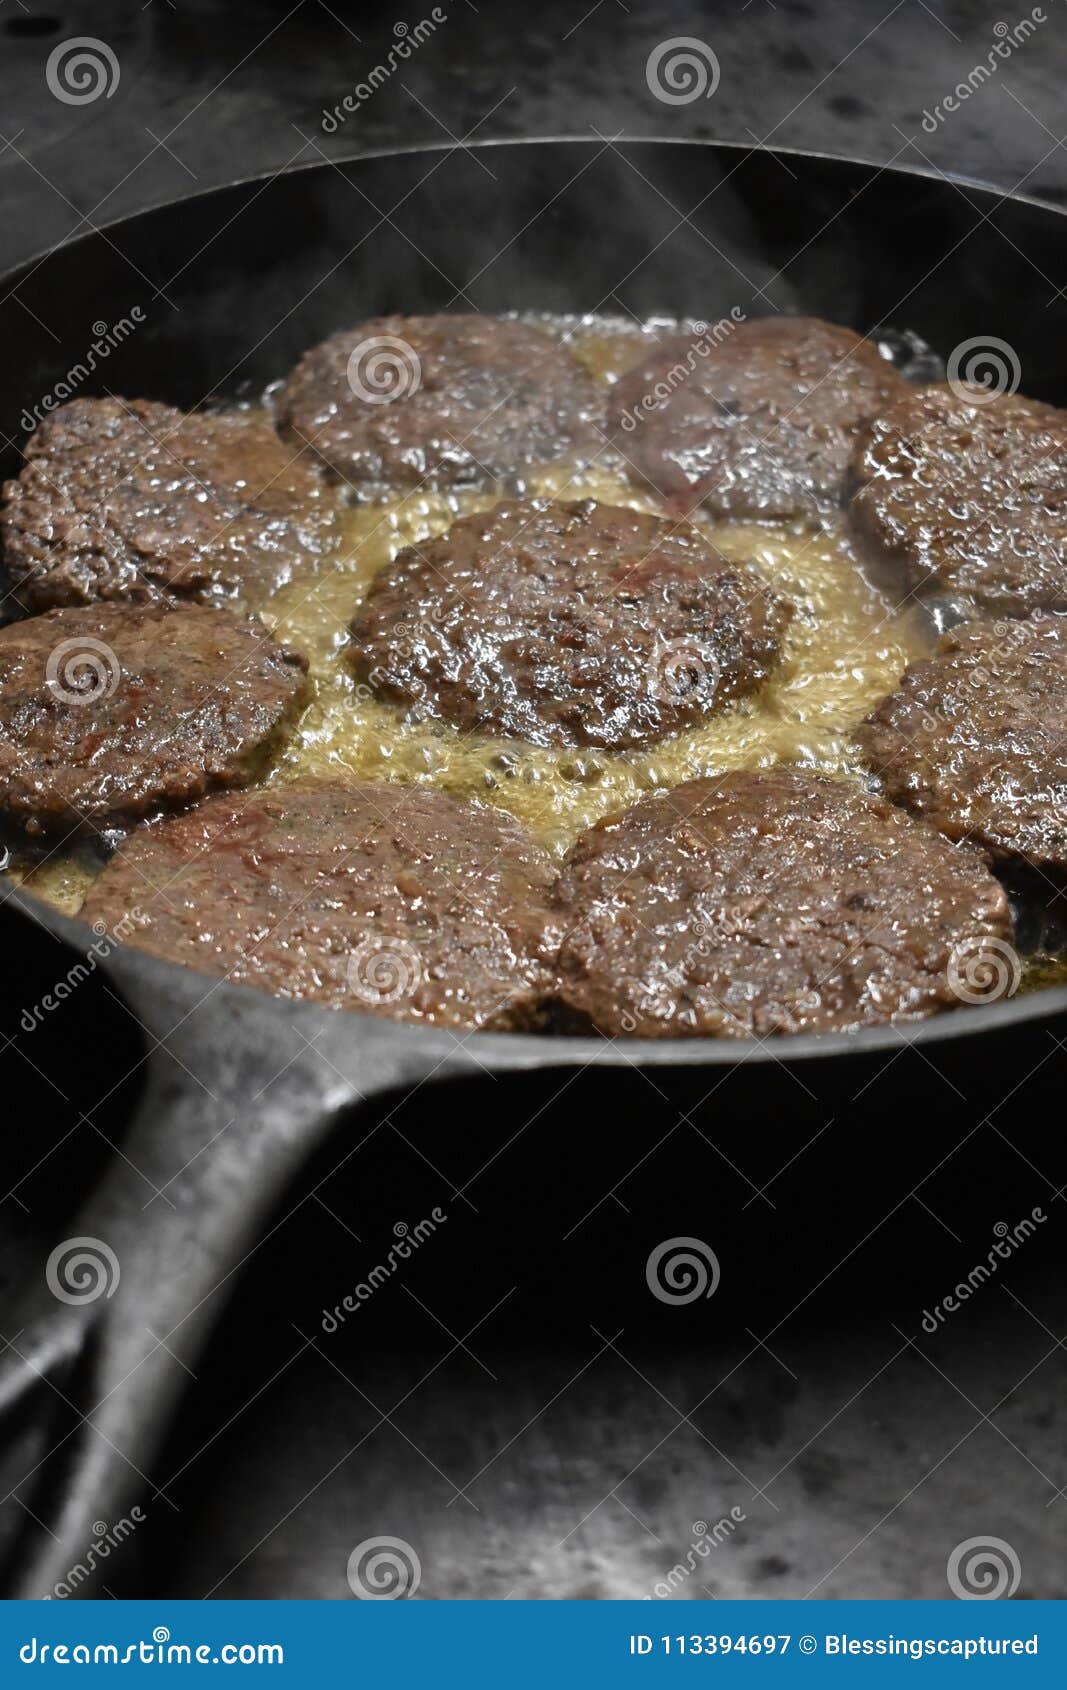 Hamburgers Cooking In A Cast Iron Skillet On A Wood Stove Stock Image Image Of Meal Baked 113394697